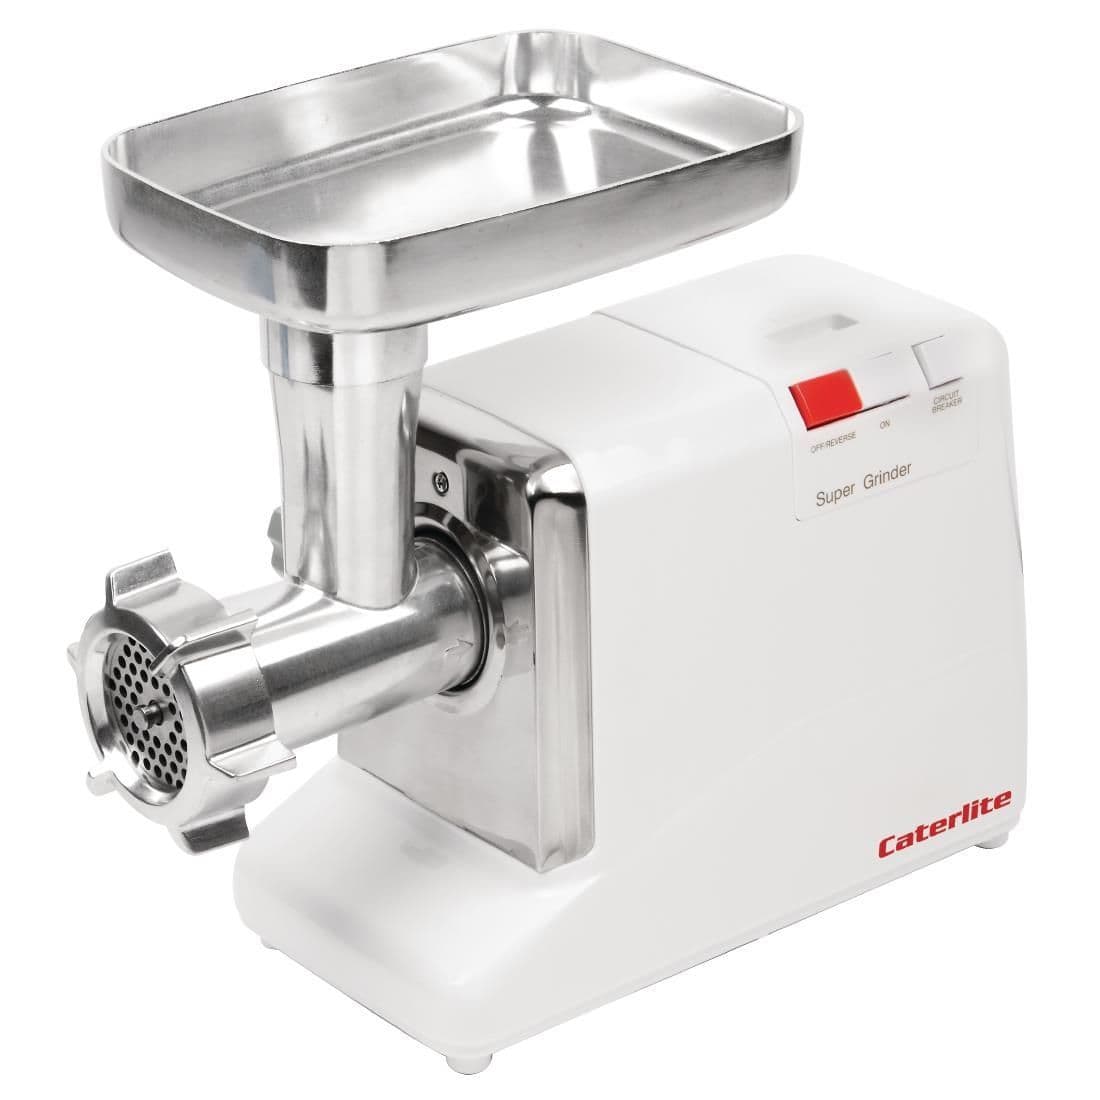 CB943 Caterlite Meat Mincer JD Catering Equipment Solutions Ltd